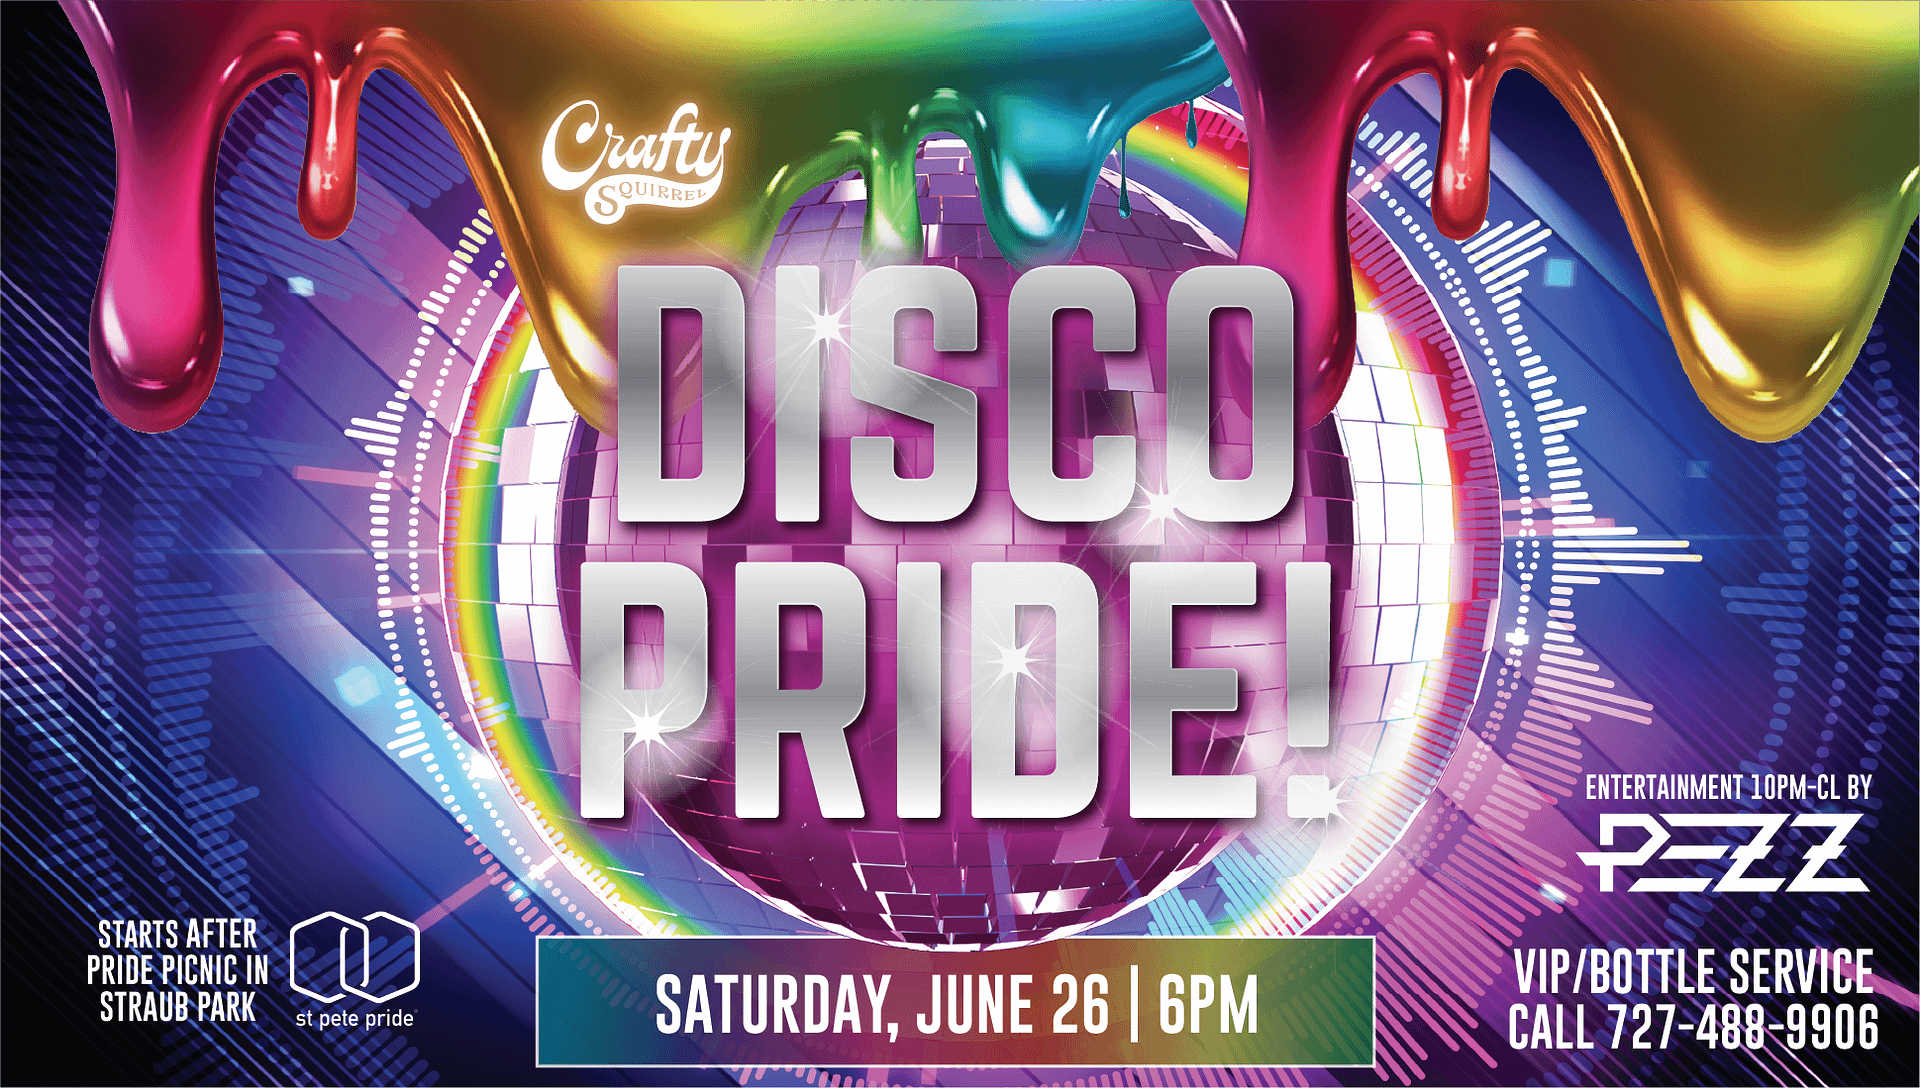 Disco Pride Party Coming Up at the Crafty Squirrel in Downtown St. Pete